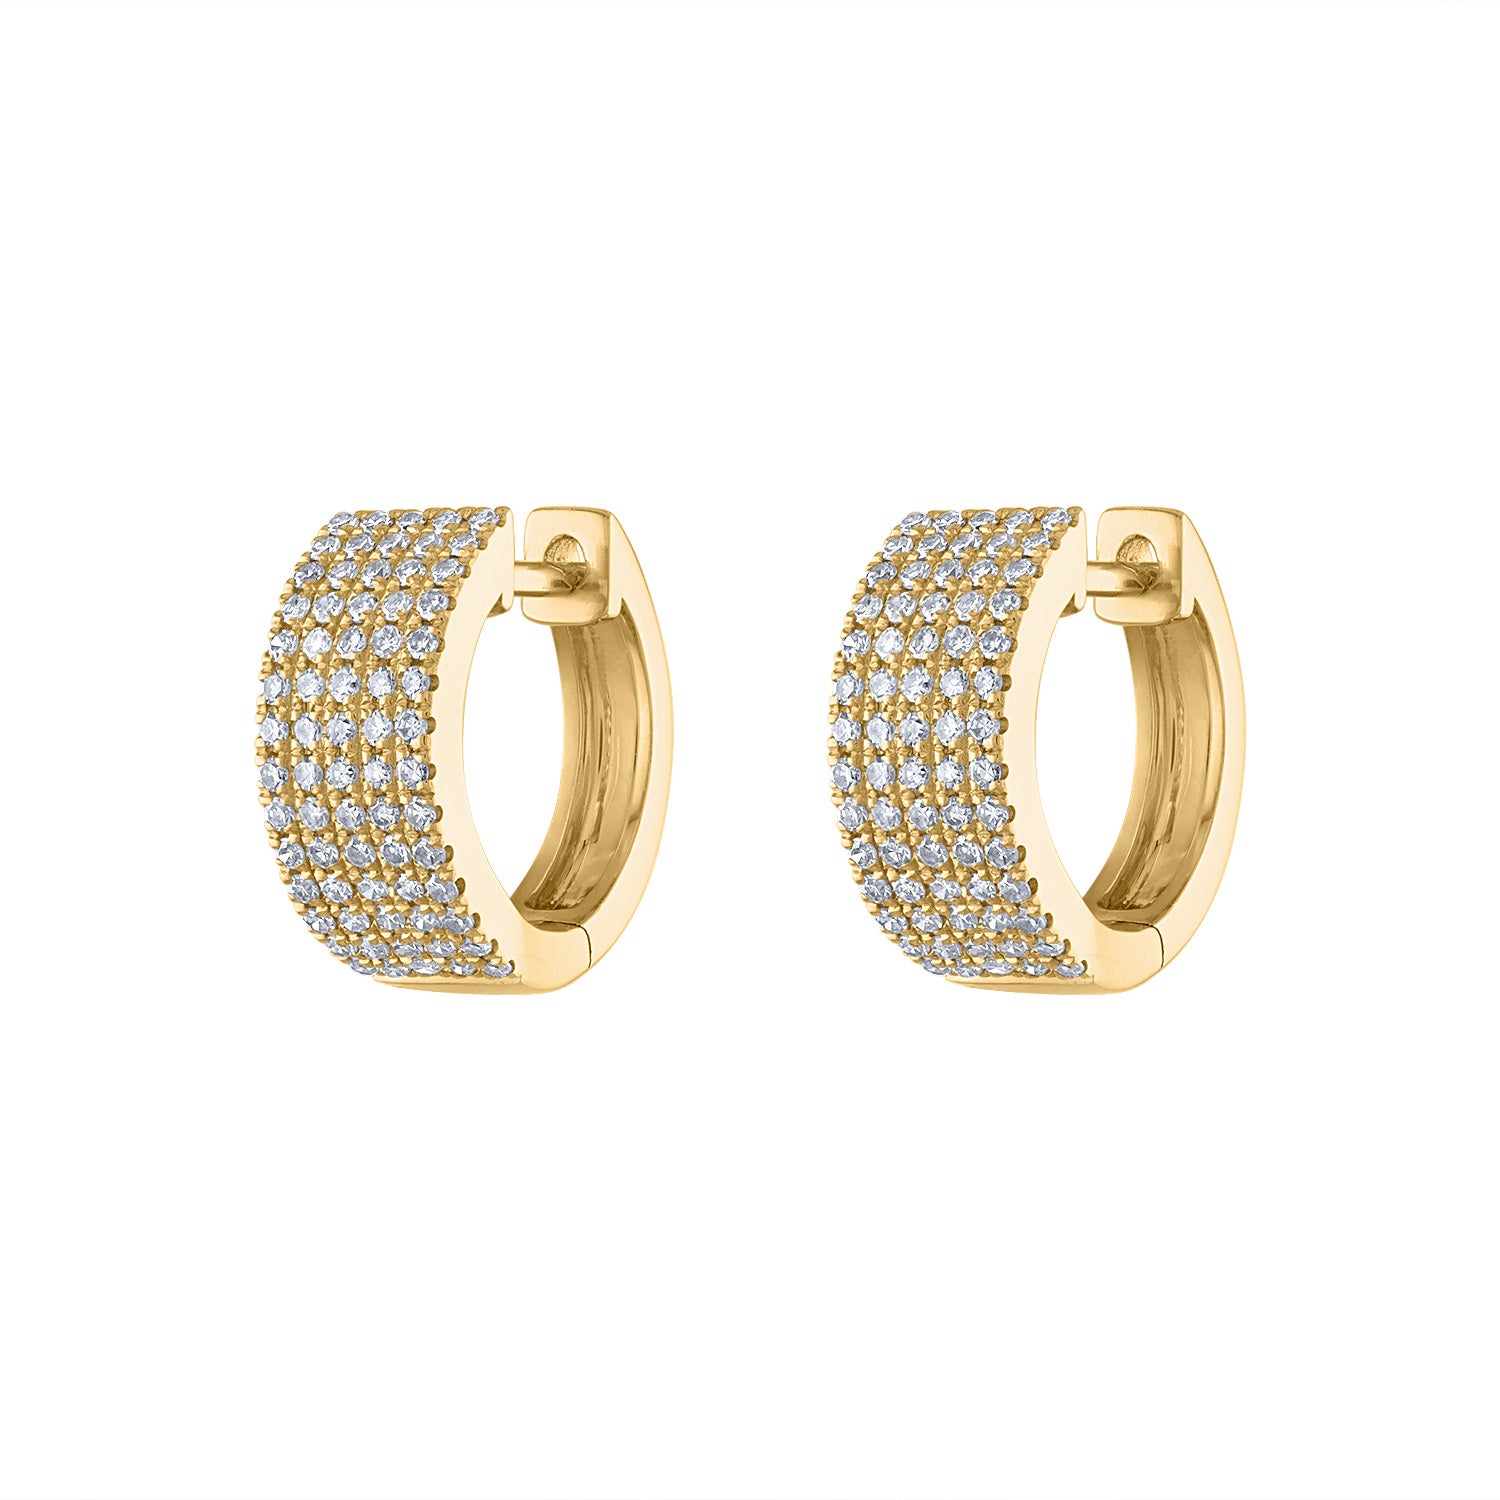 14KT GOLD PAVE WIDE HUGGIE EARRING